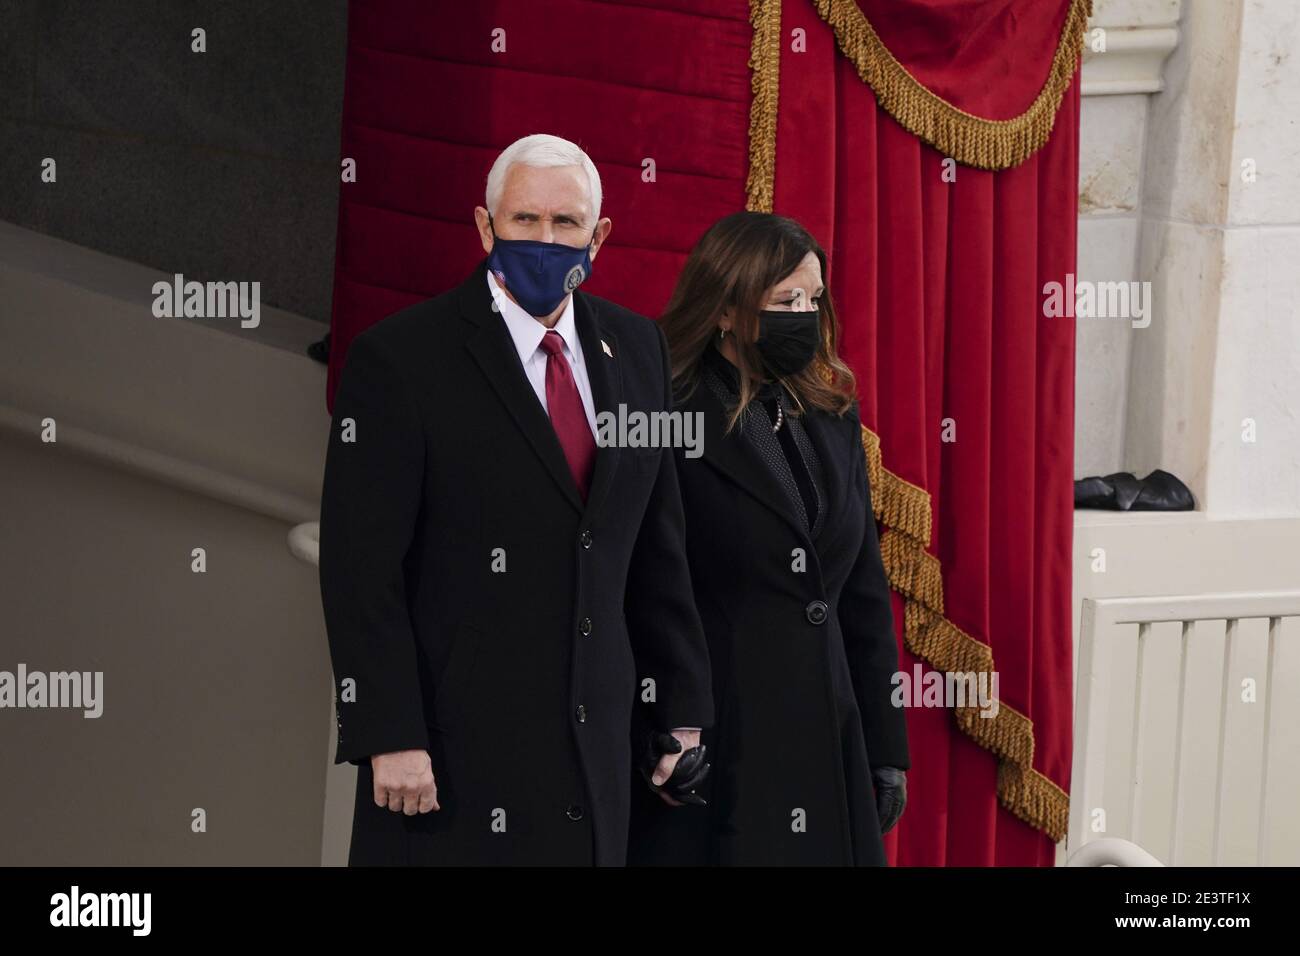 U.S. Vice President Mike Pence and Second Lady Karen Pence arrive to the 59th presidential inauguration in Washington, DC, U.S., on Wednesday, Jan. 20, 2021. Biden will propose a broad immigration overhaul on his first day as president, including a shortened pathway to U.S. citizenship for undocumented migrants - a complete reversal from Donald Trump's immigration restrictions and crackdowns, but one that faces major roadblocks in Congress. Photographer: Kevin Dietsch/UPI/Bloomberg/MediaPunch Stock Photo